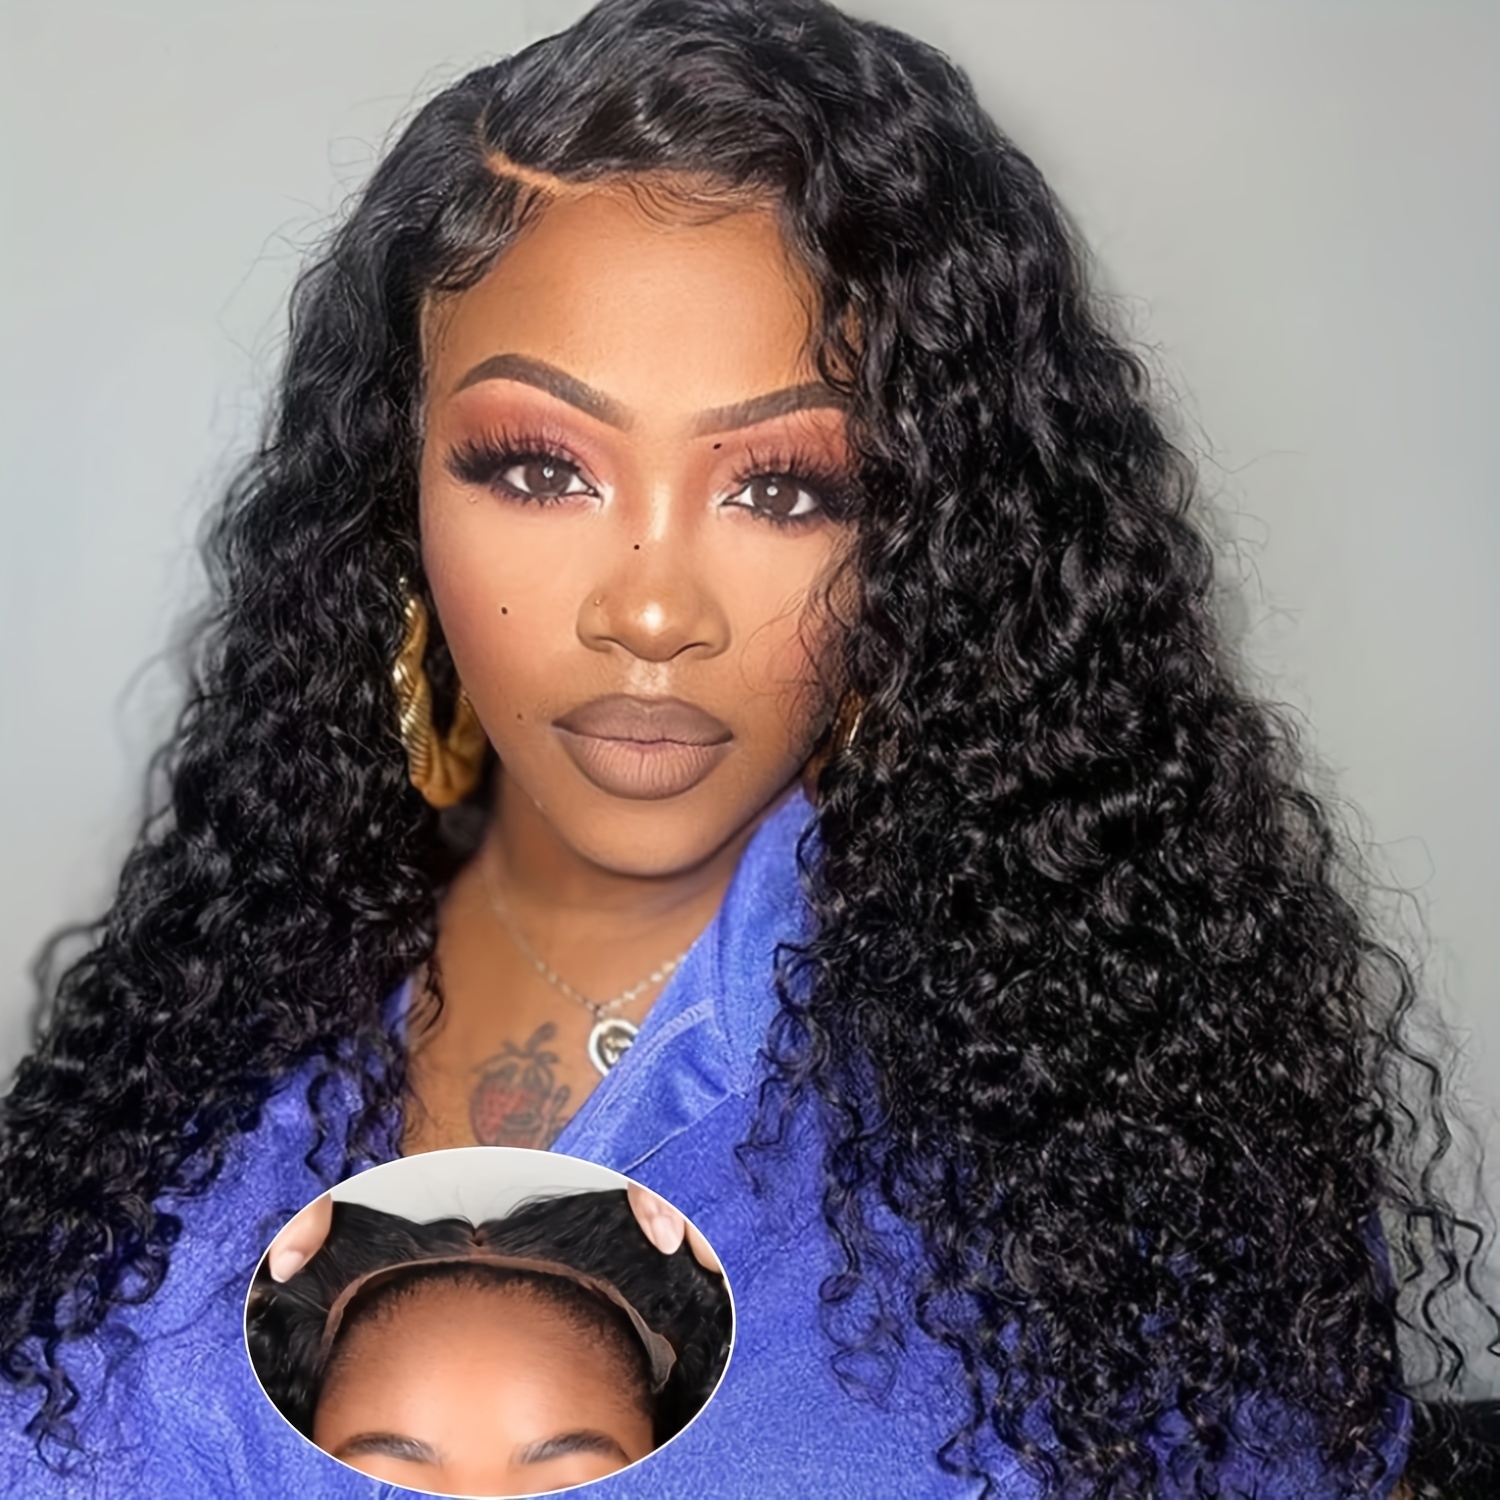 30 38 inch 360 Body Wave Lace Frontal Wigs Human Hair Wig Wave Wig Women